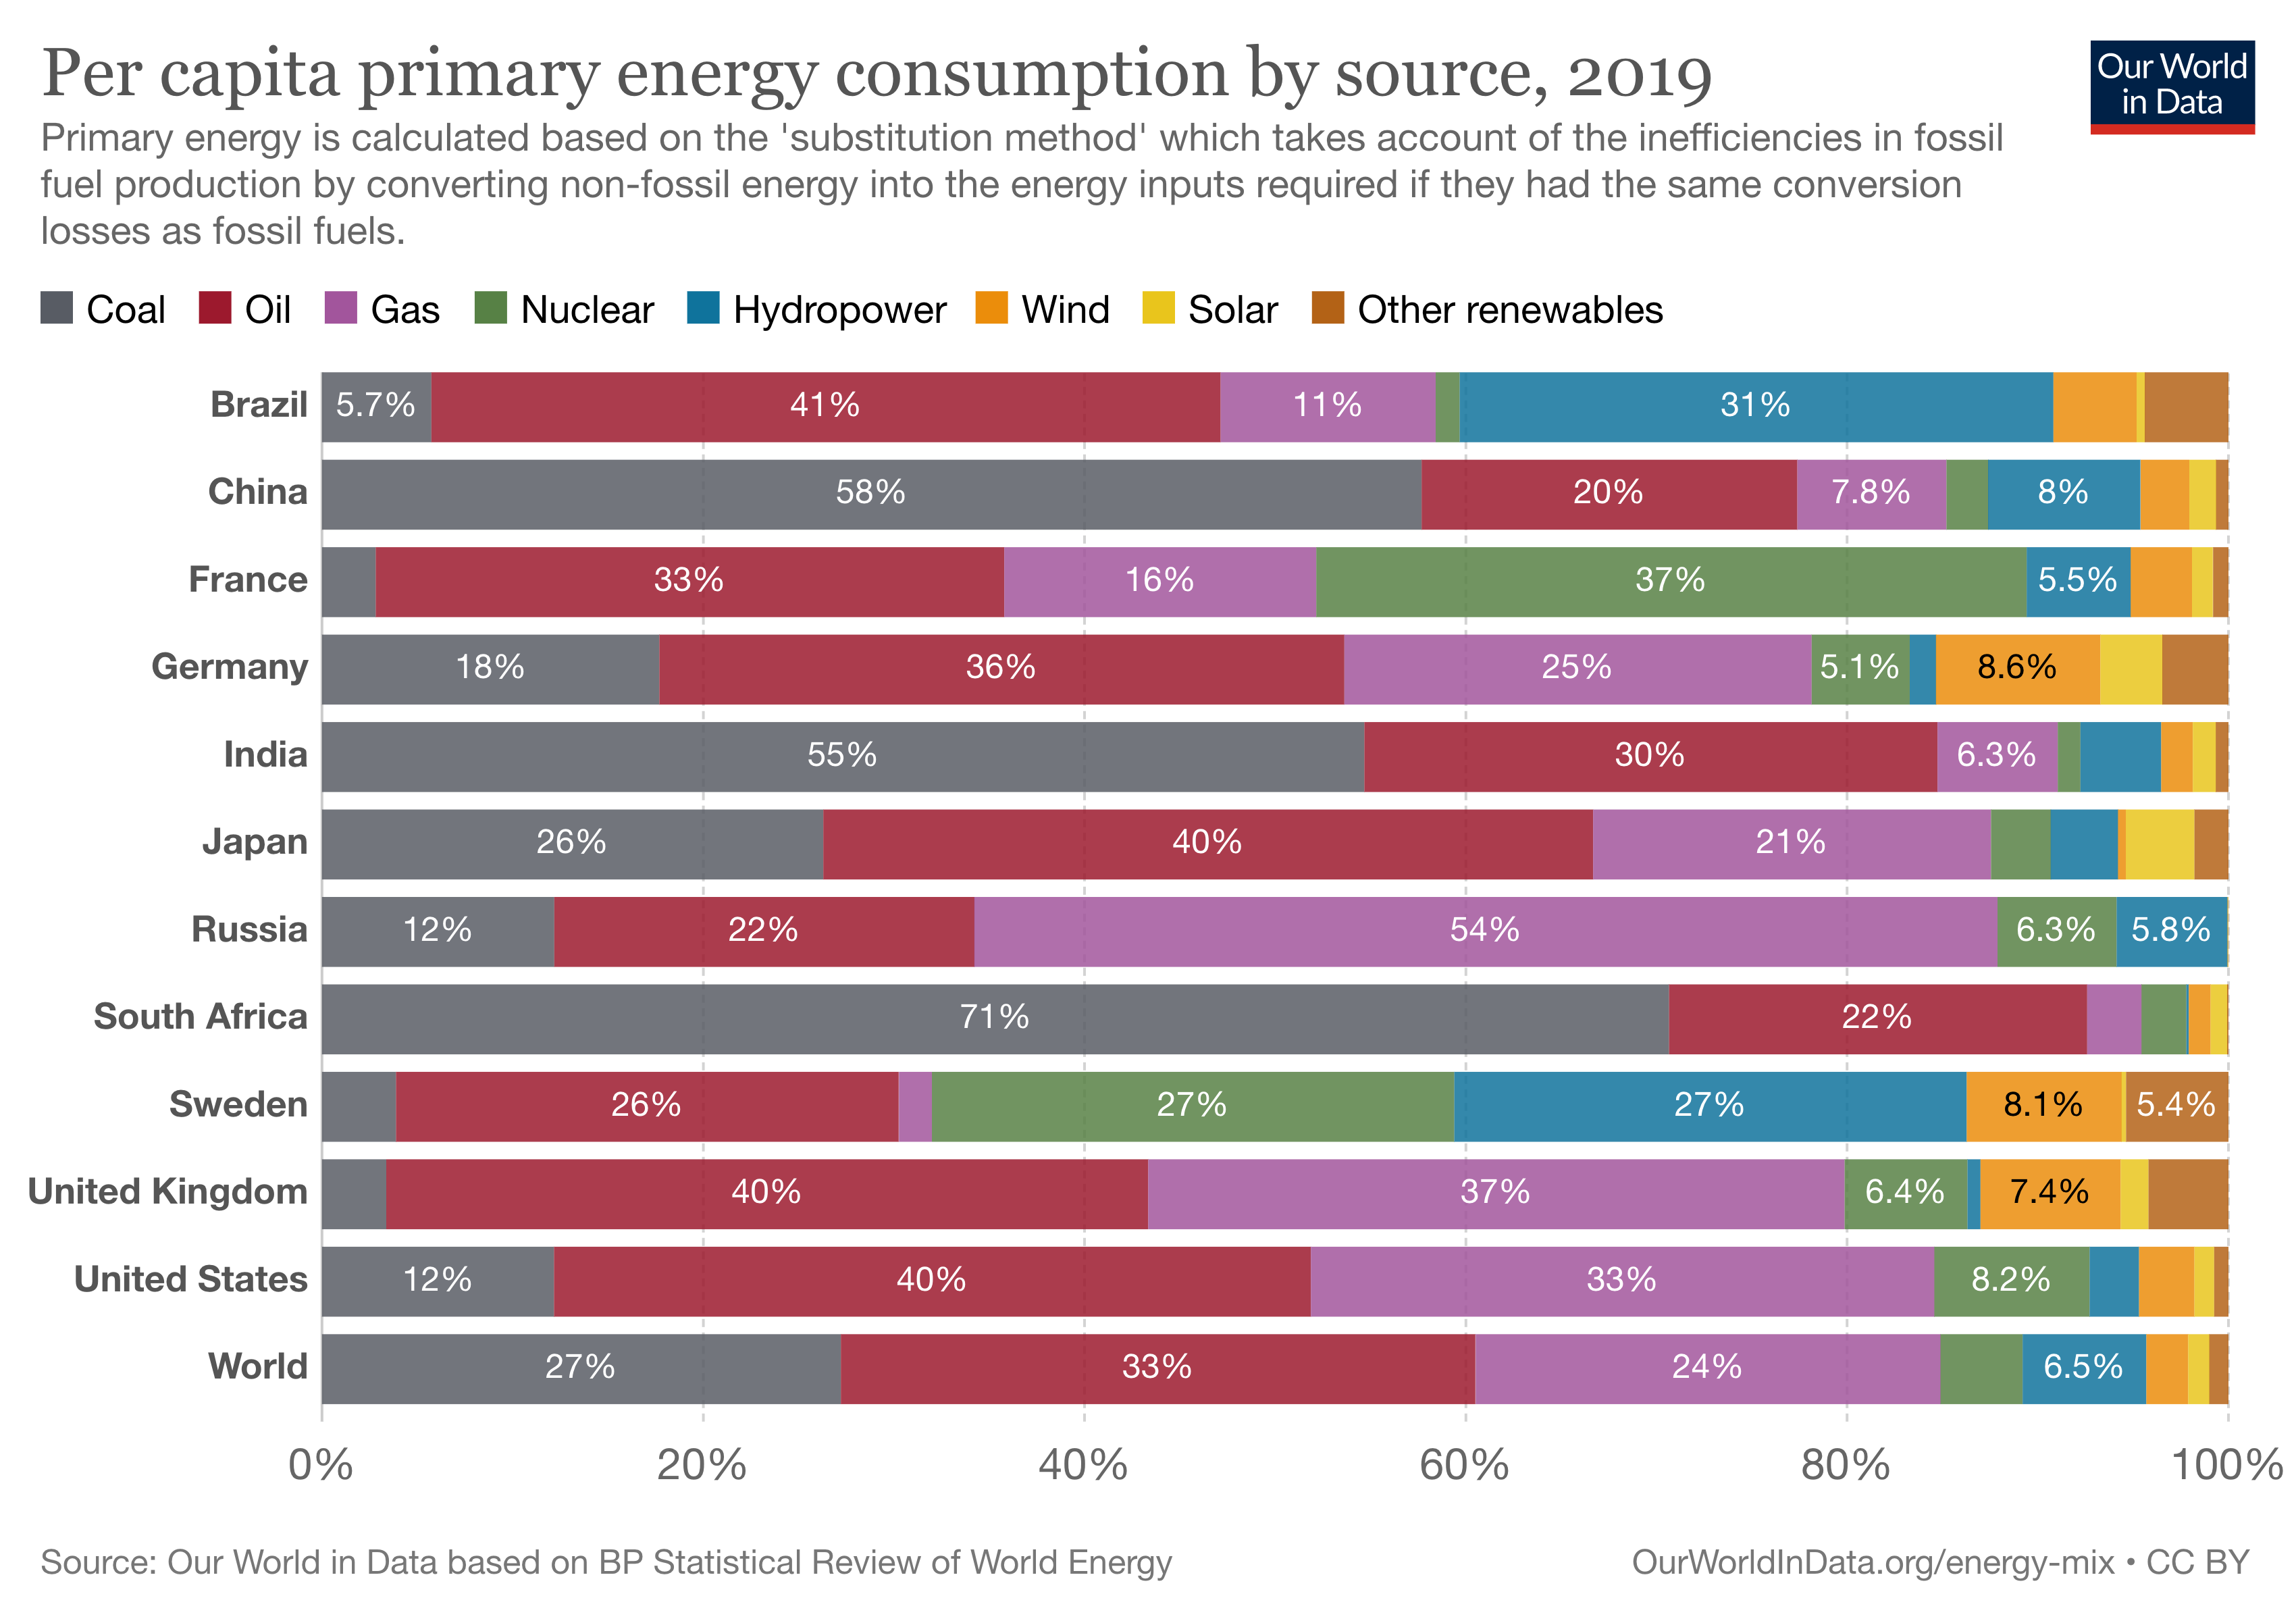 Per Capita Energy Consumption by Source